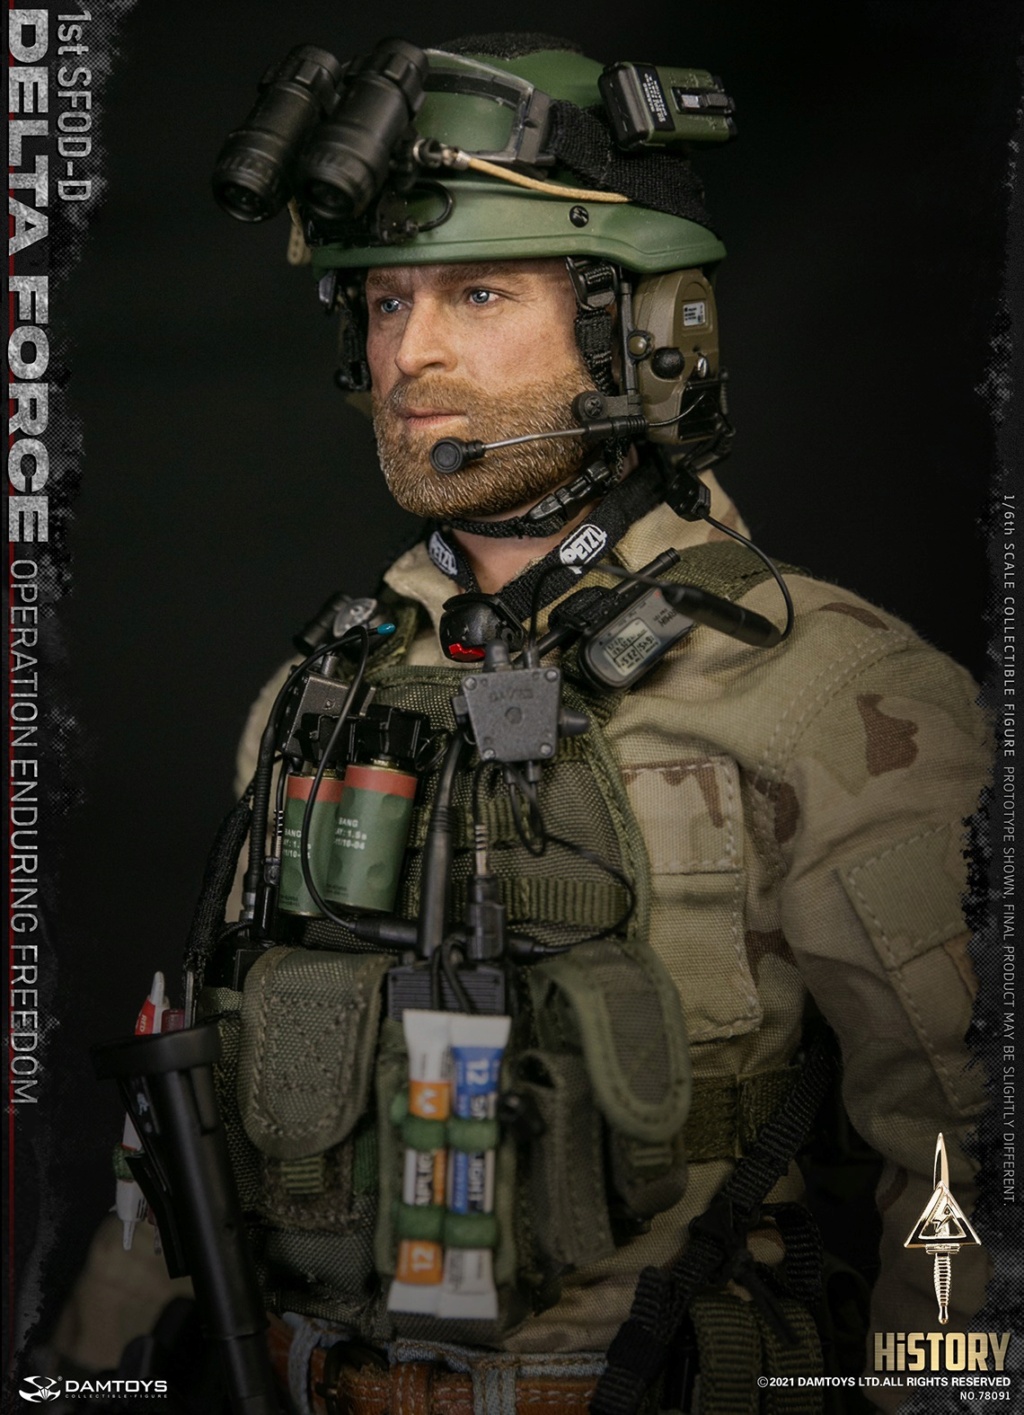 modernmilitary - NEW PRODUCT: DAMTOYS: 1/6 Delta Forces 1st SFOD-D Operation Enduring Freedom #78091 10521610